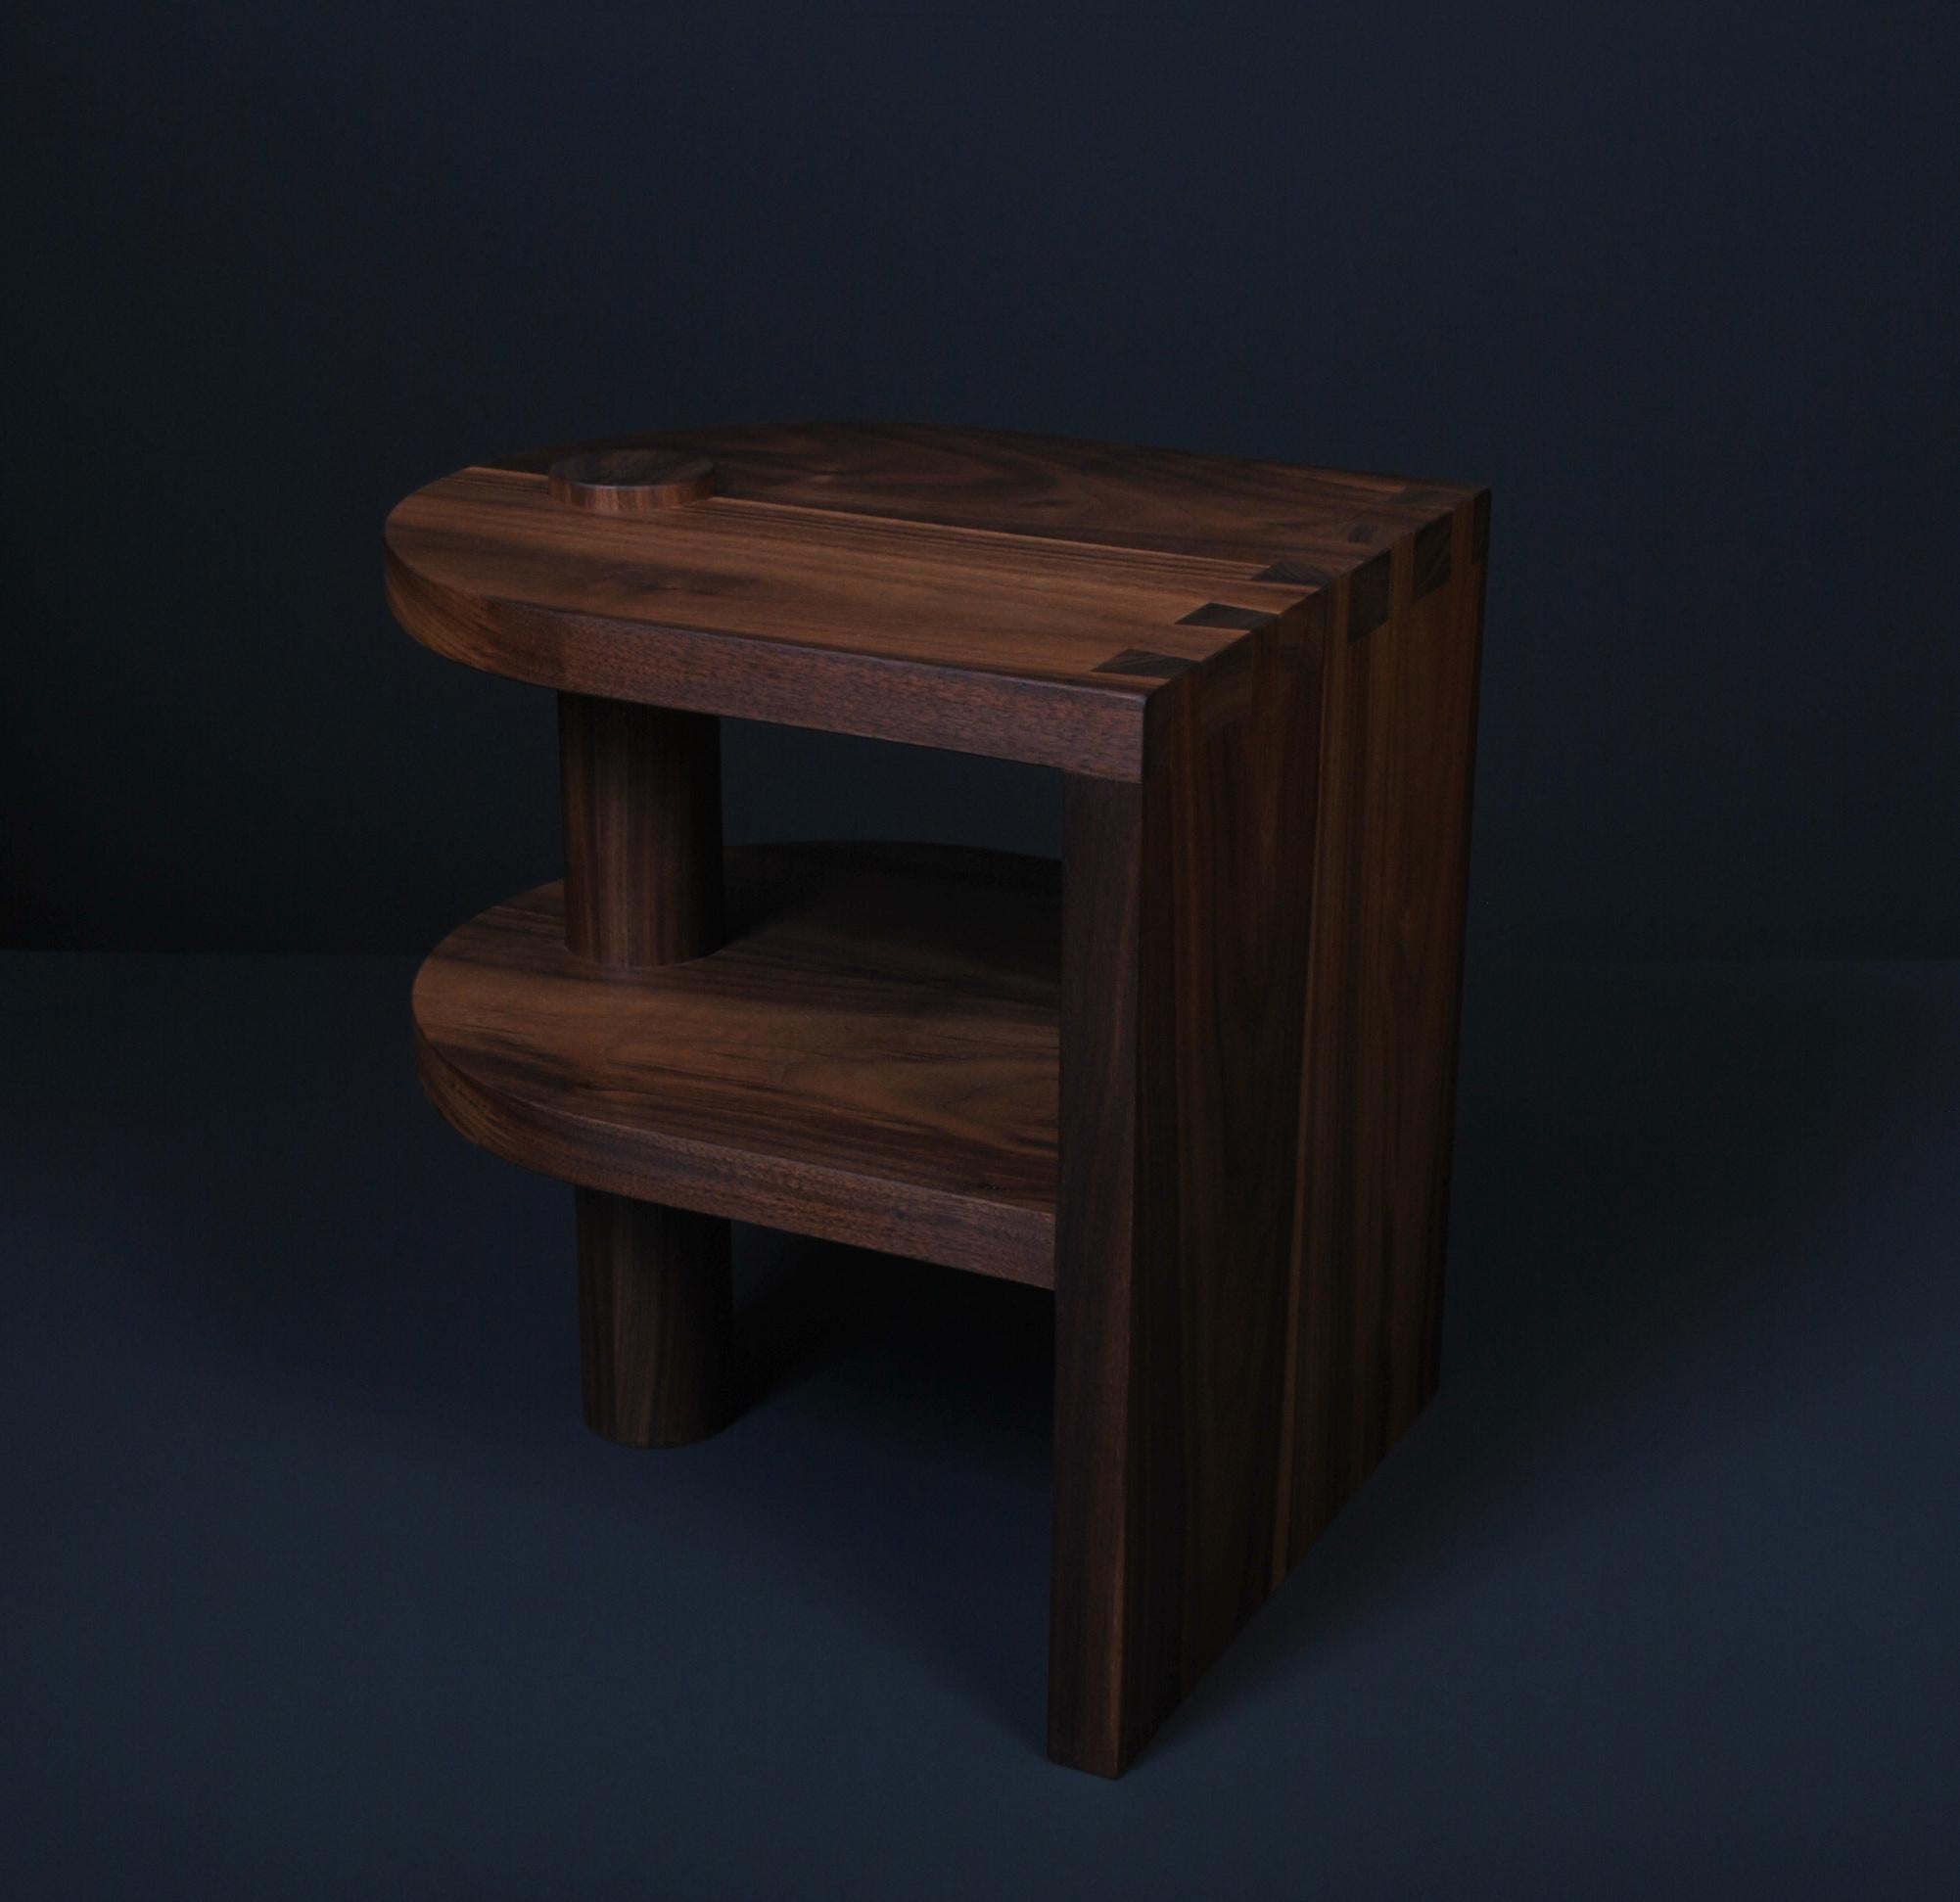 Architectural postmodern American black walnut pillar end or side table. Designed by us and handcrafted in England using traditional techniques using the finest American Black Walnut. Hand-cut large dovetail jointing details with hand - turned